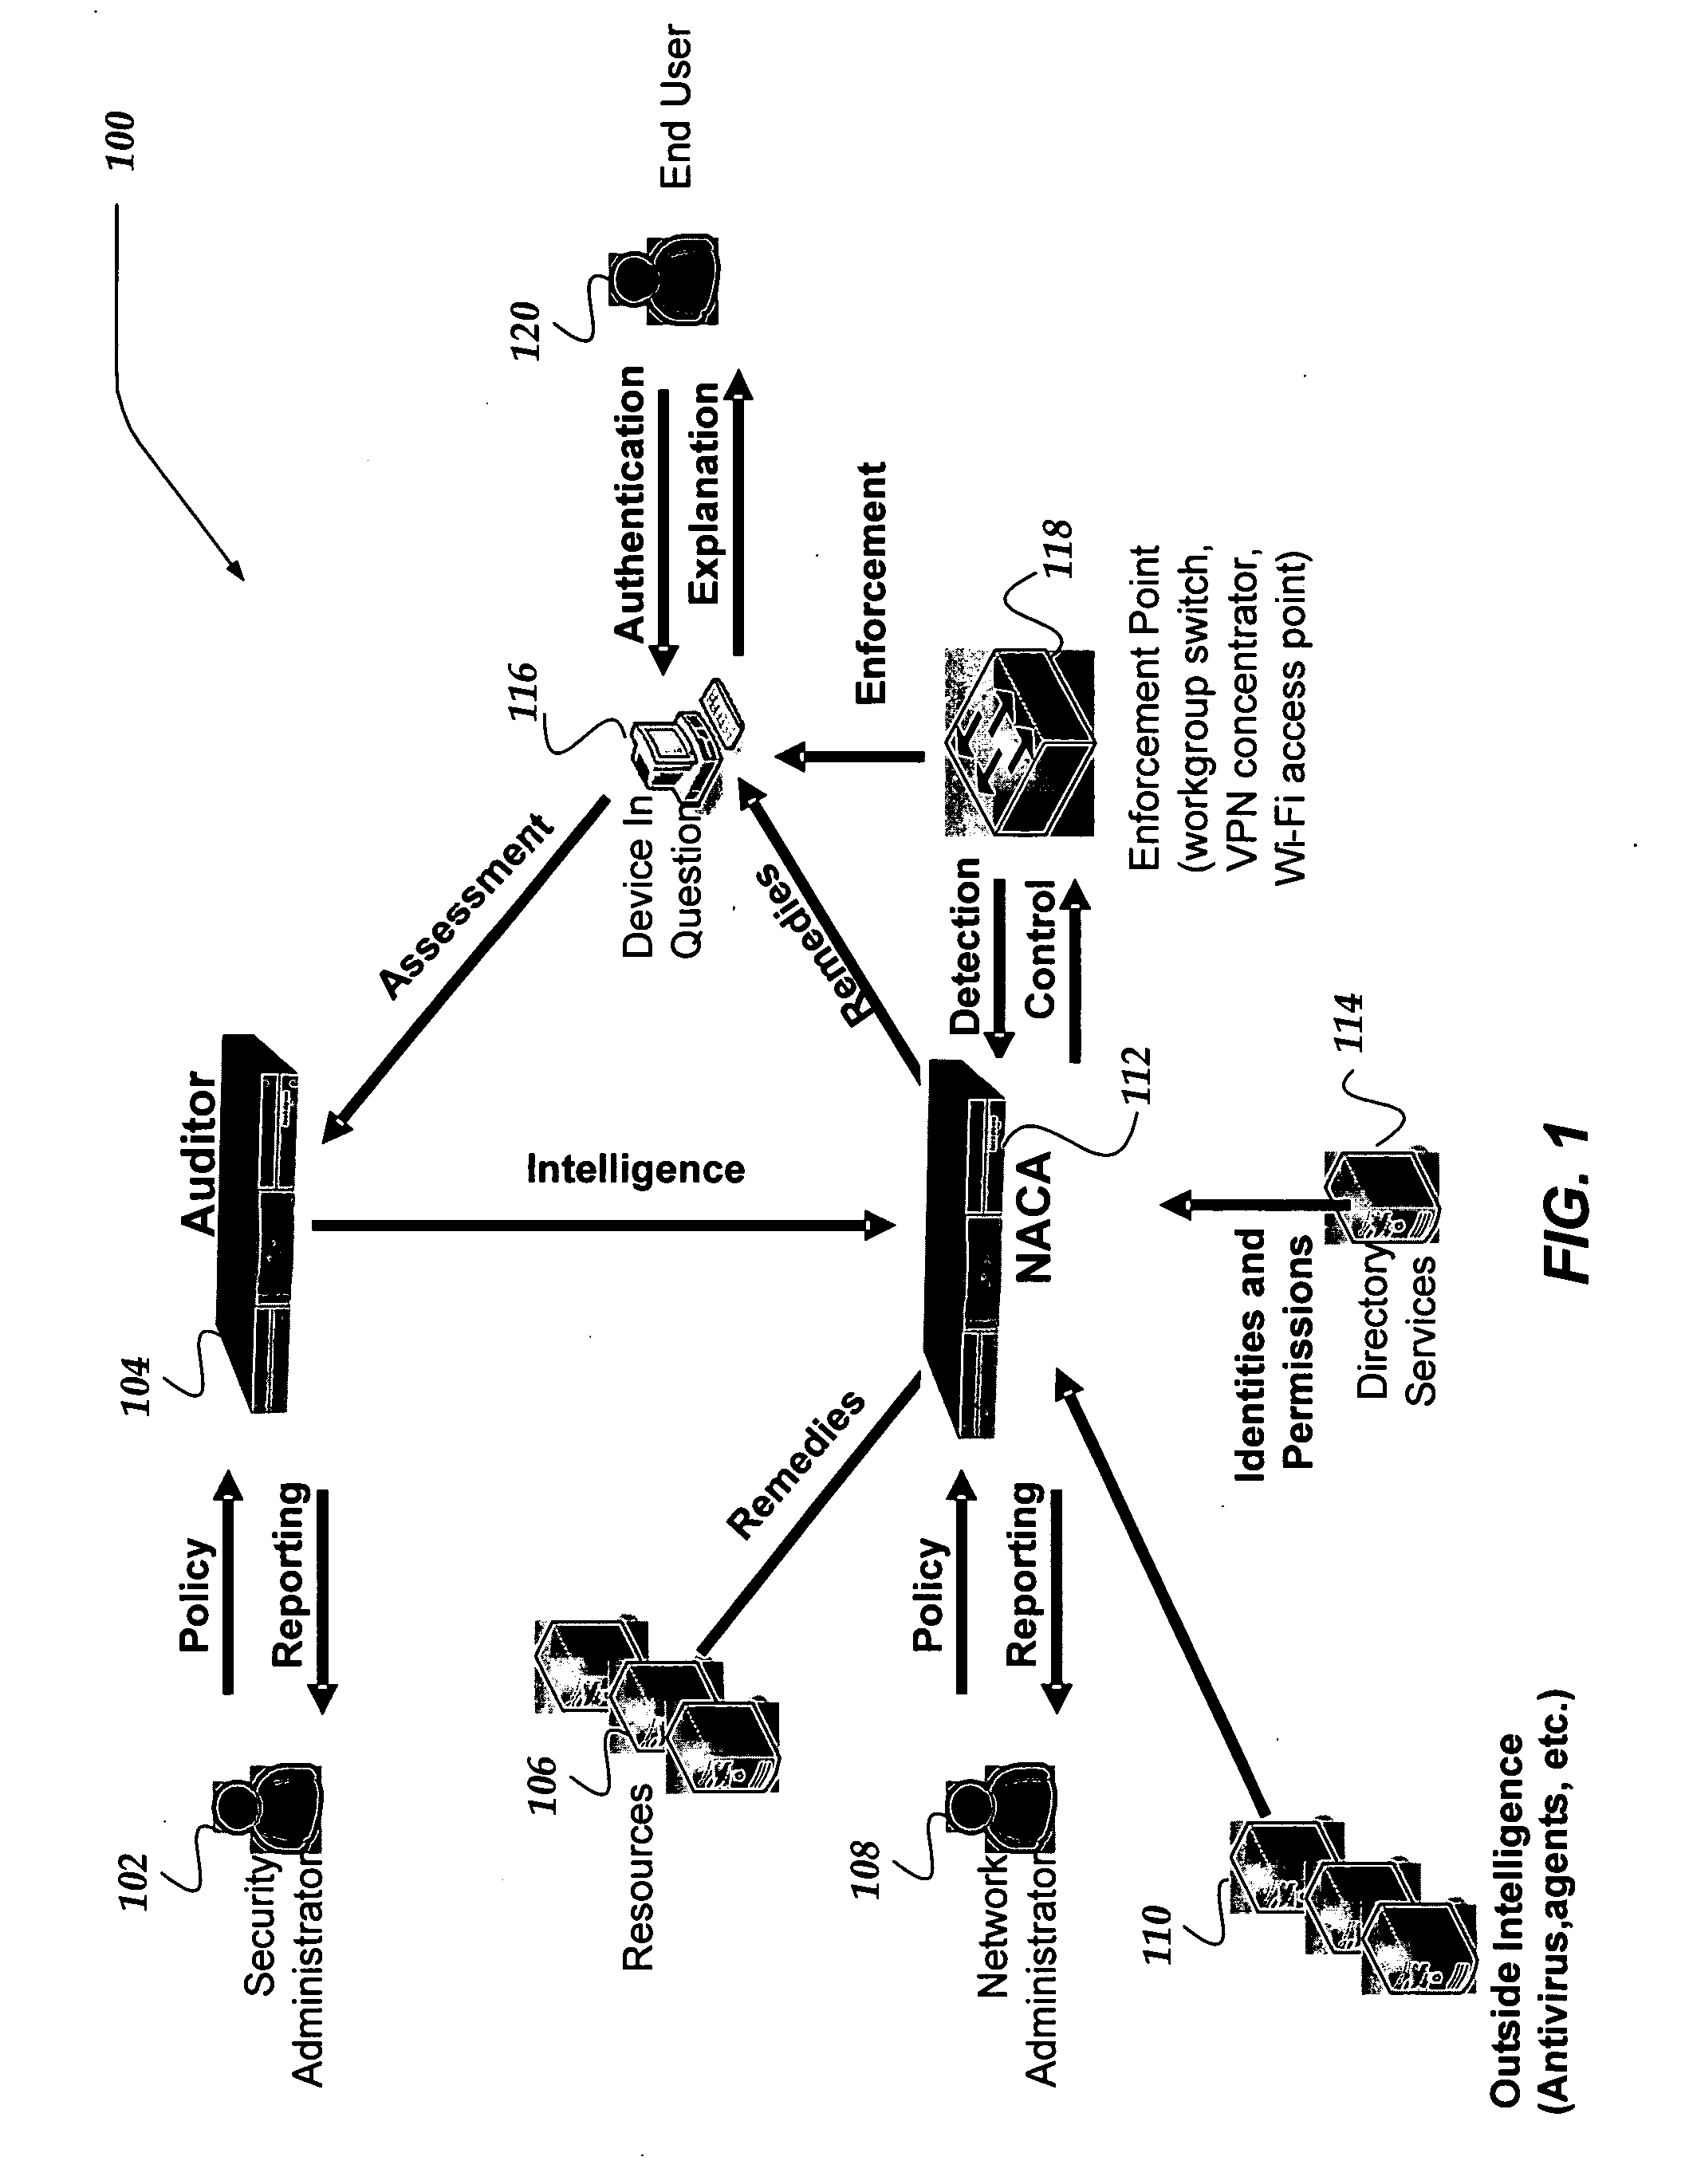 Network appliance for securely quarantining a node on a network